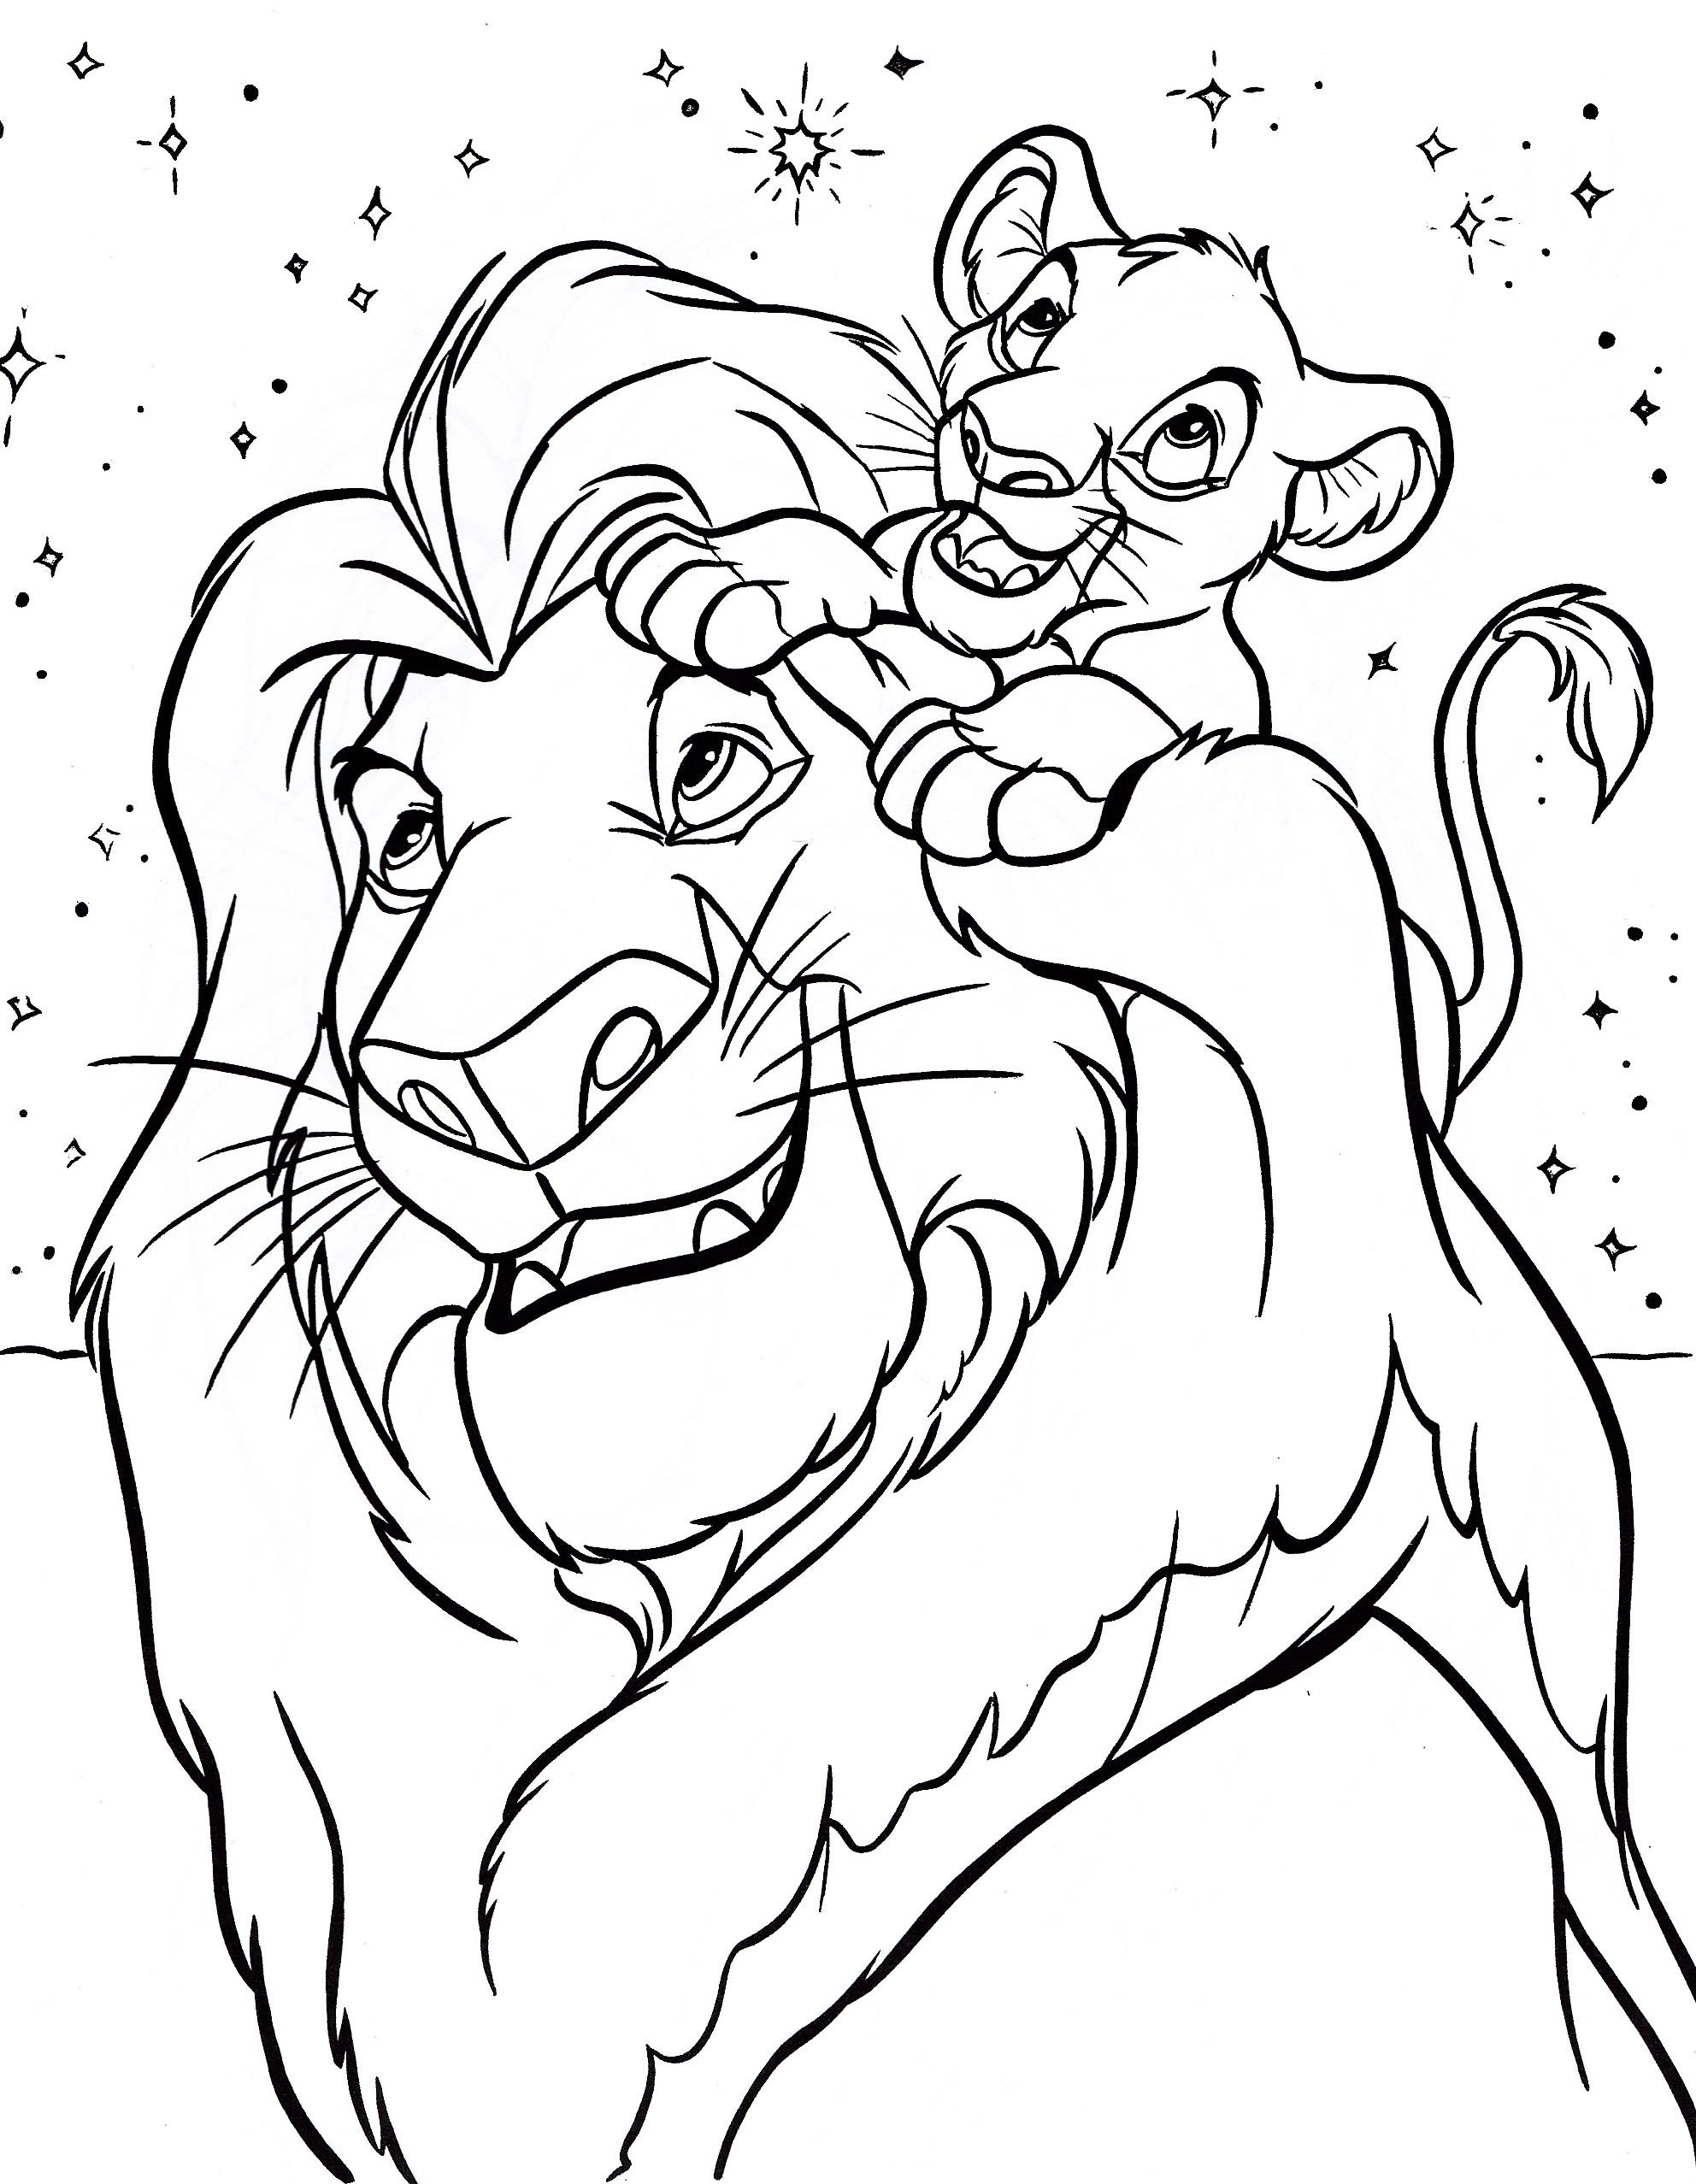 Free Disney Coloring Pages For Kids
 Disney Coloring Pages Best Coloring Pages For Kids